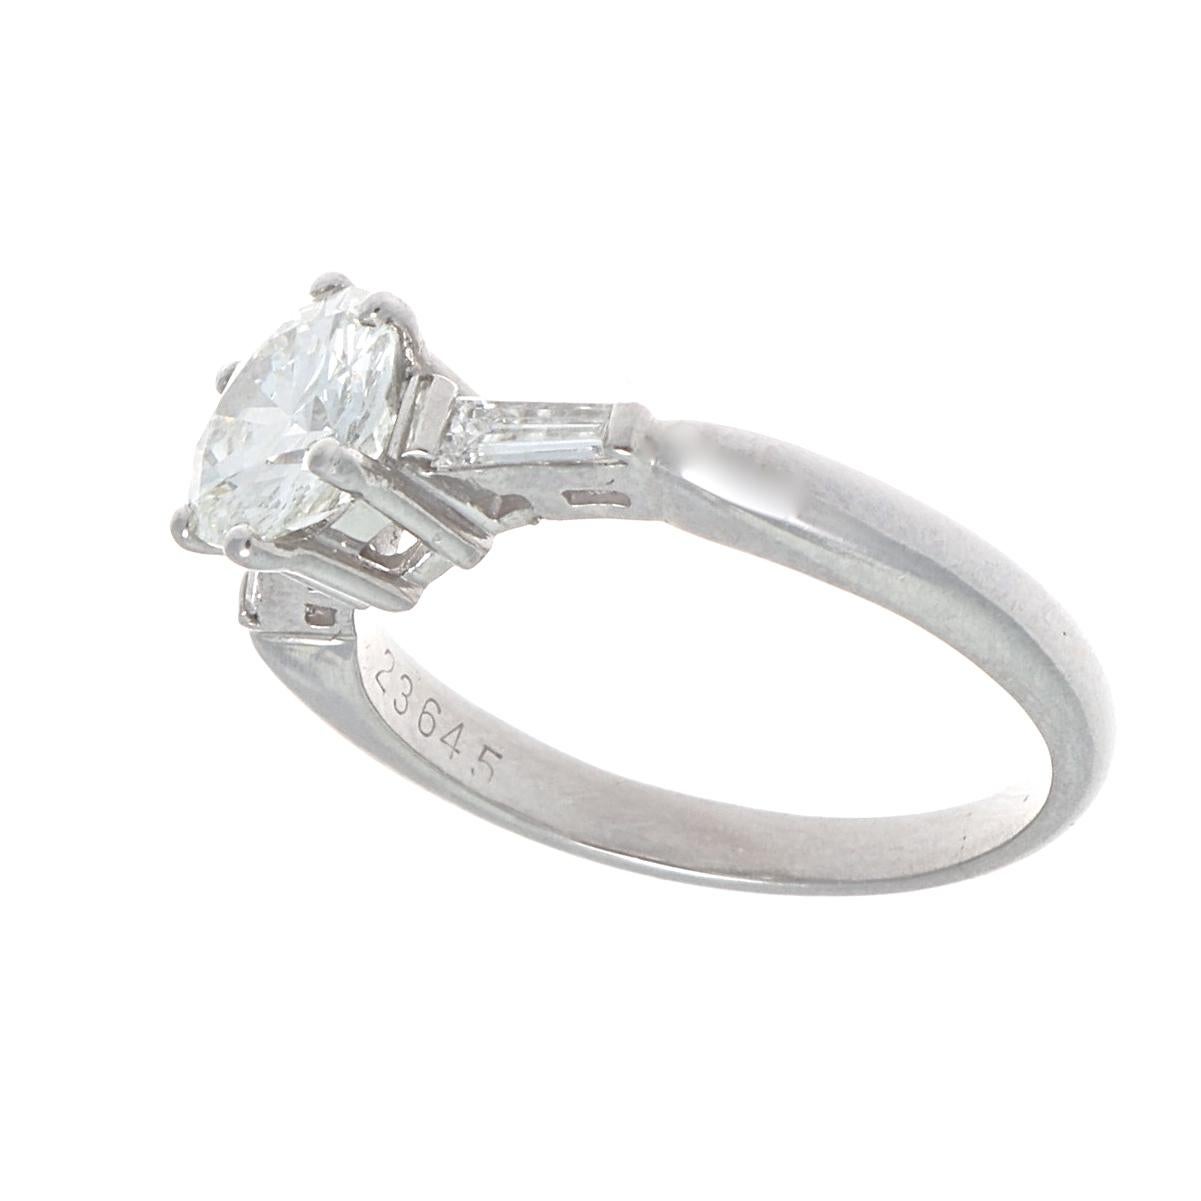 The perfect way to say I love you. Featuring a 0.76 carat round brilliant cut diamond approximately G color, VS1 clarity. Accented on either side by a single colorless baguette cut diamond. Crafted in platinum. Ring size 3-3/4 and can easily be